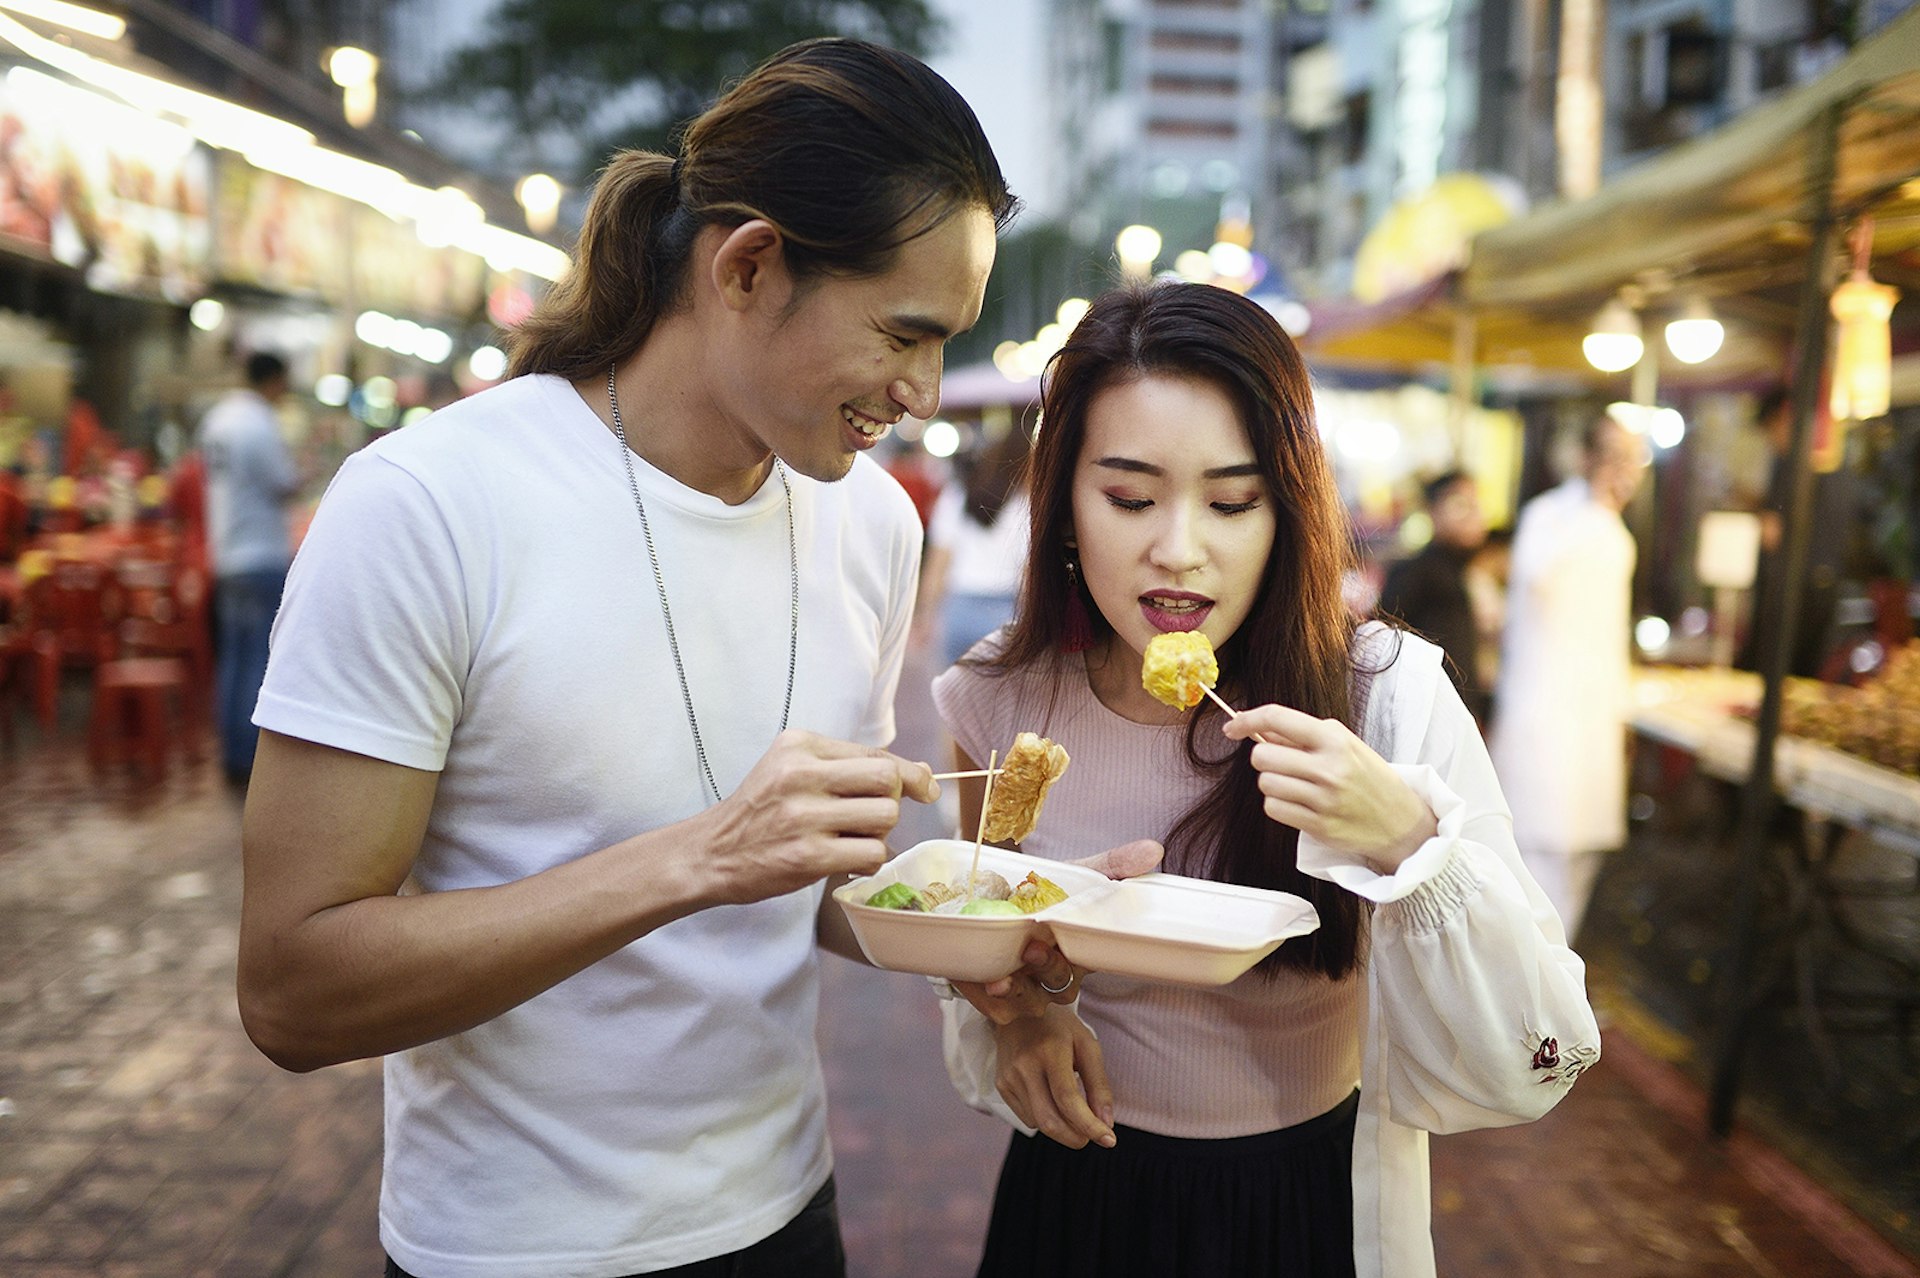 A couple eating some street food in a market